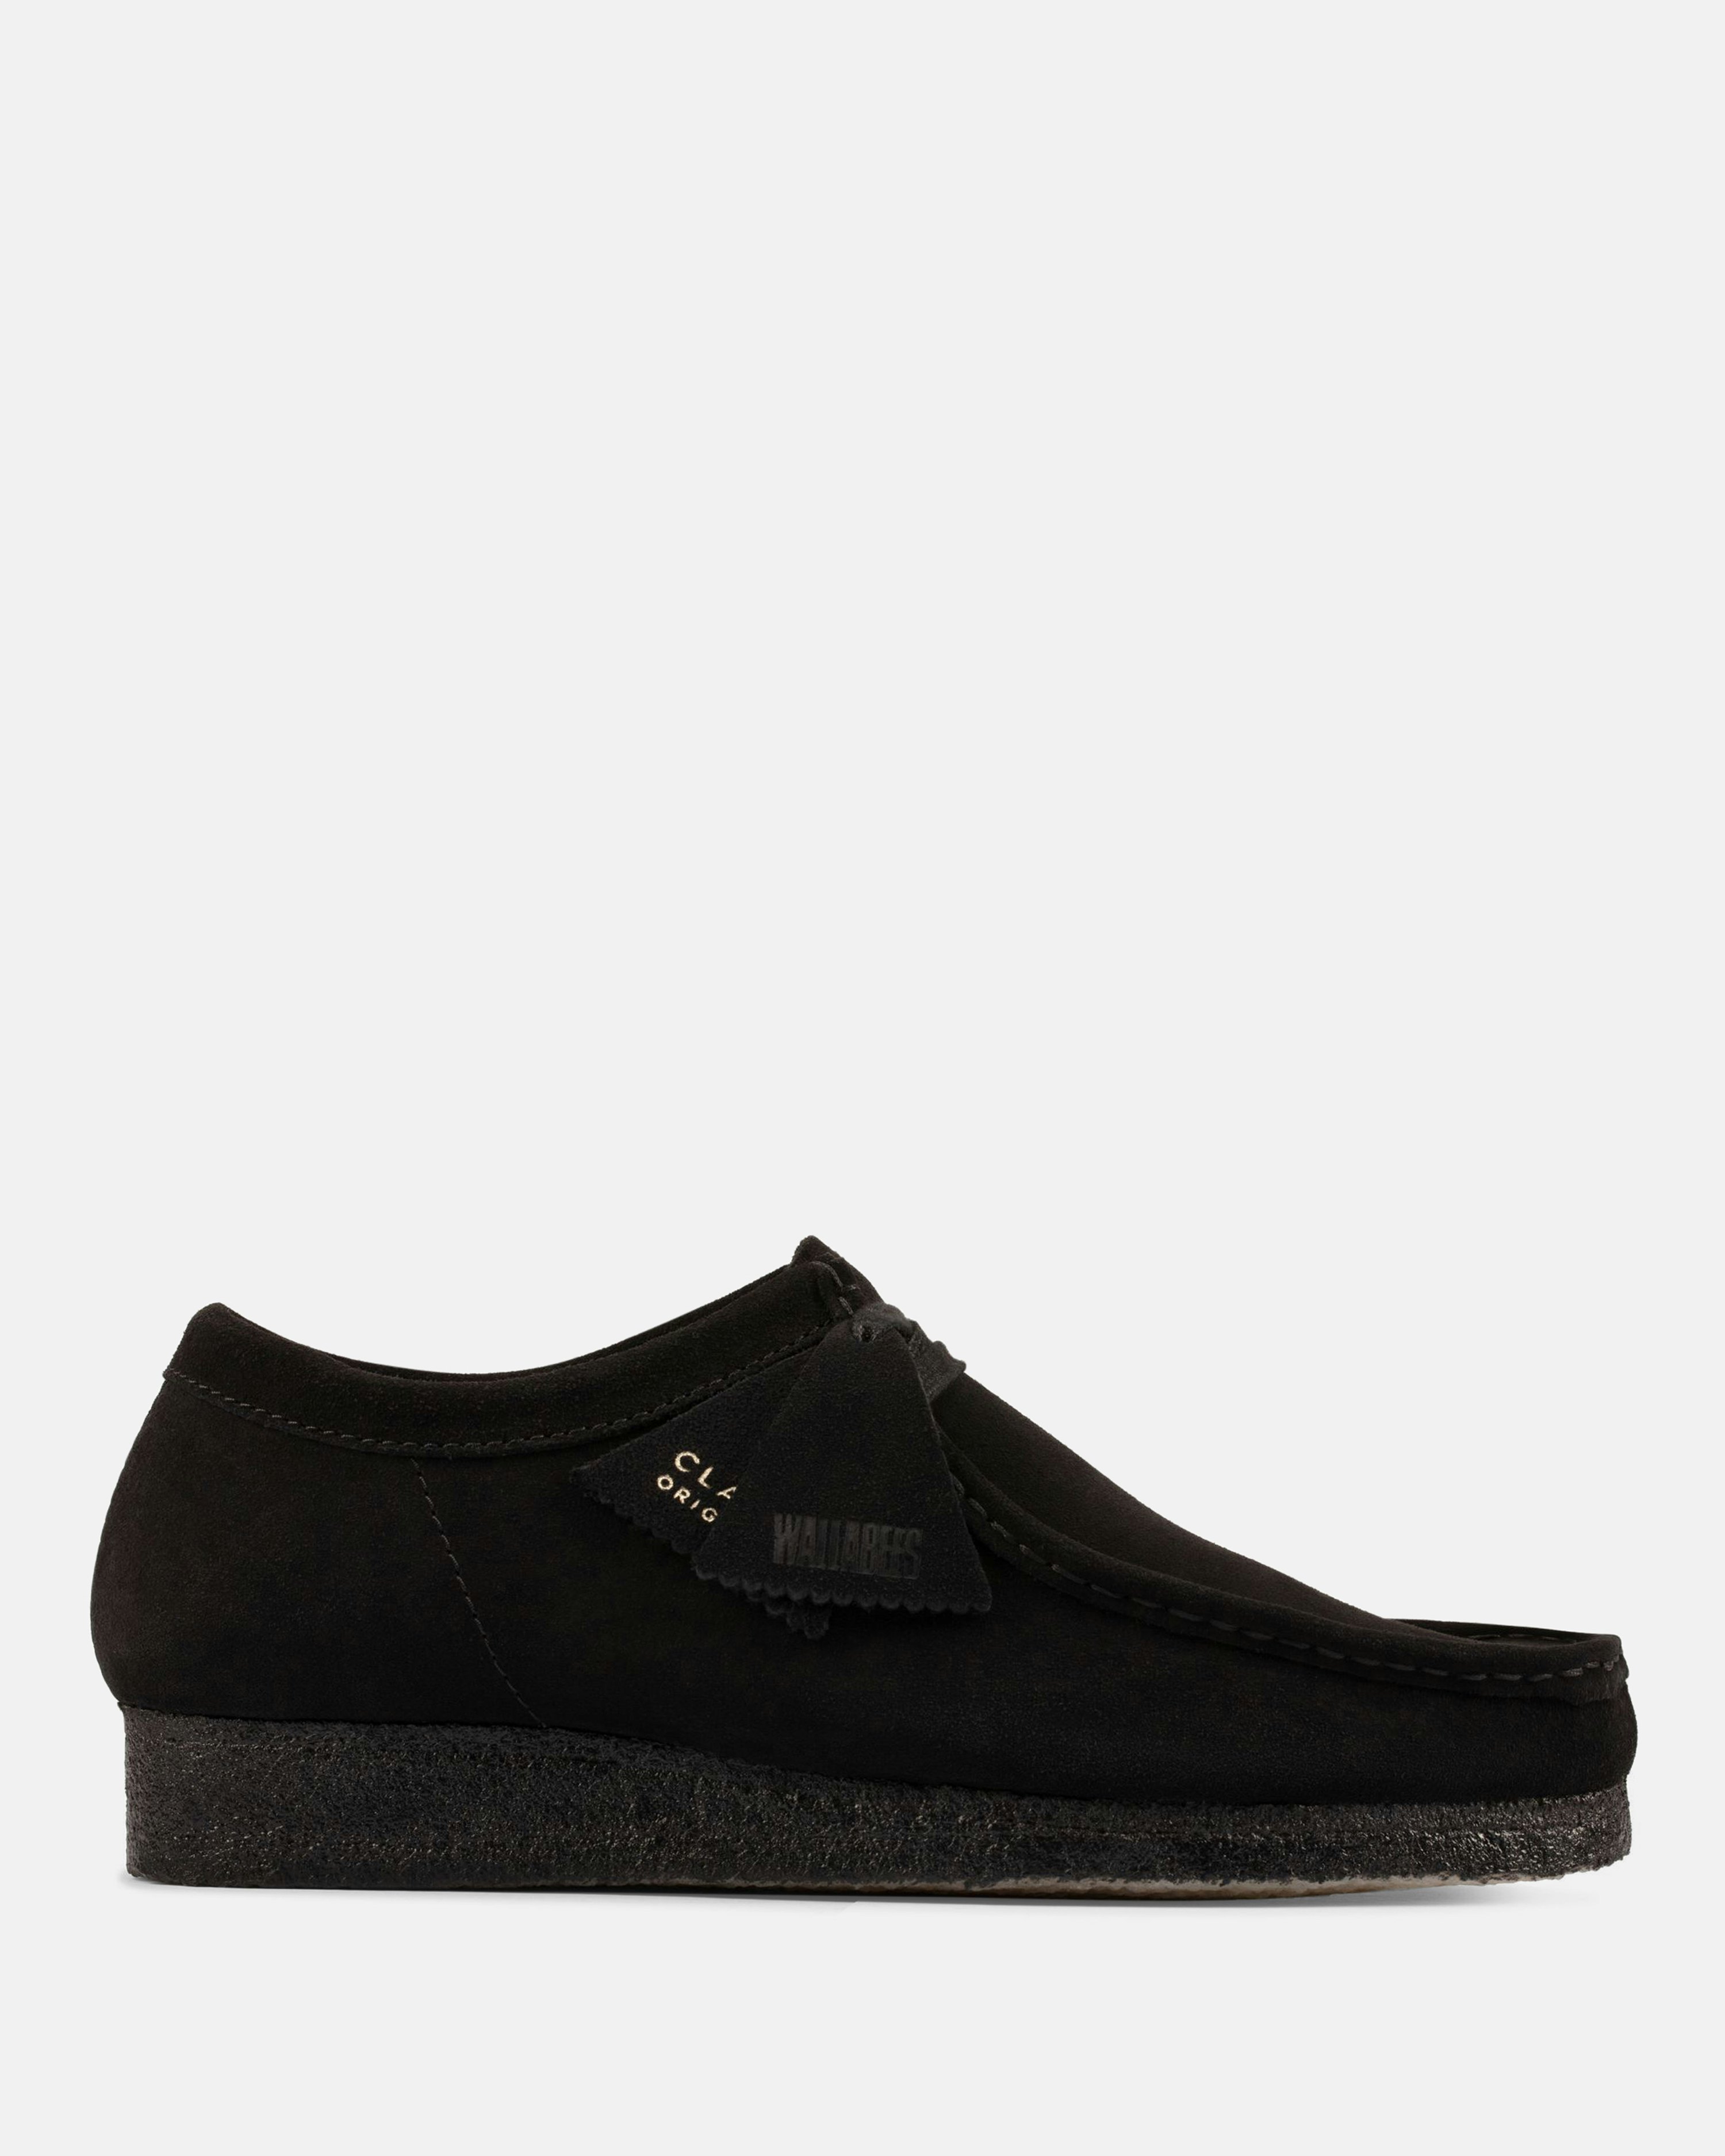 Wallabee Loafers